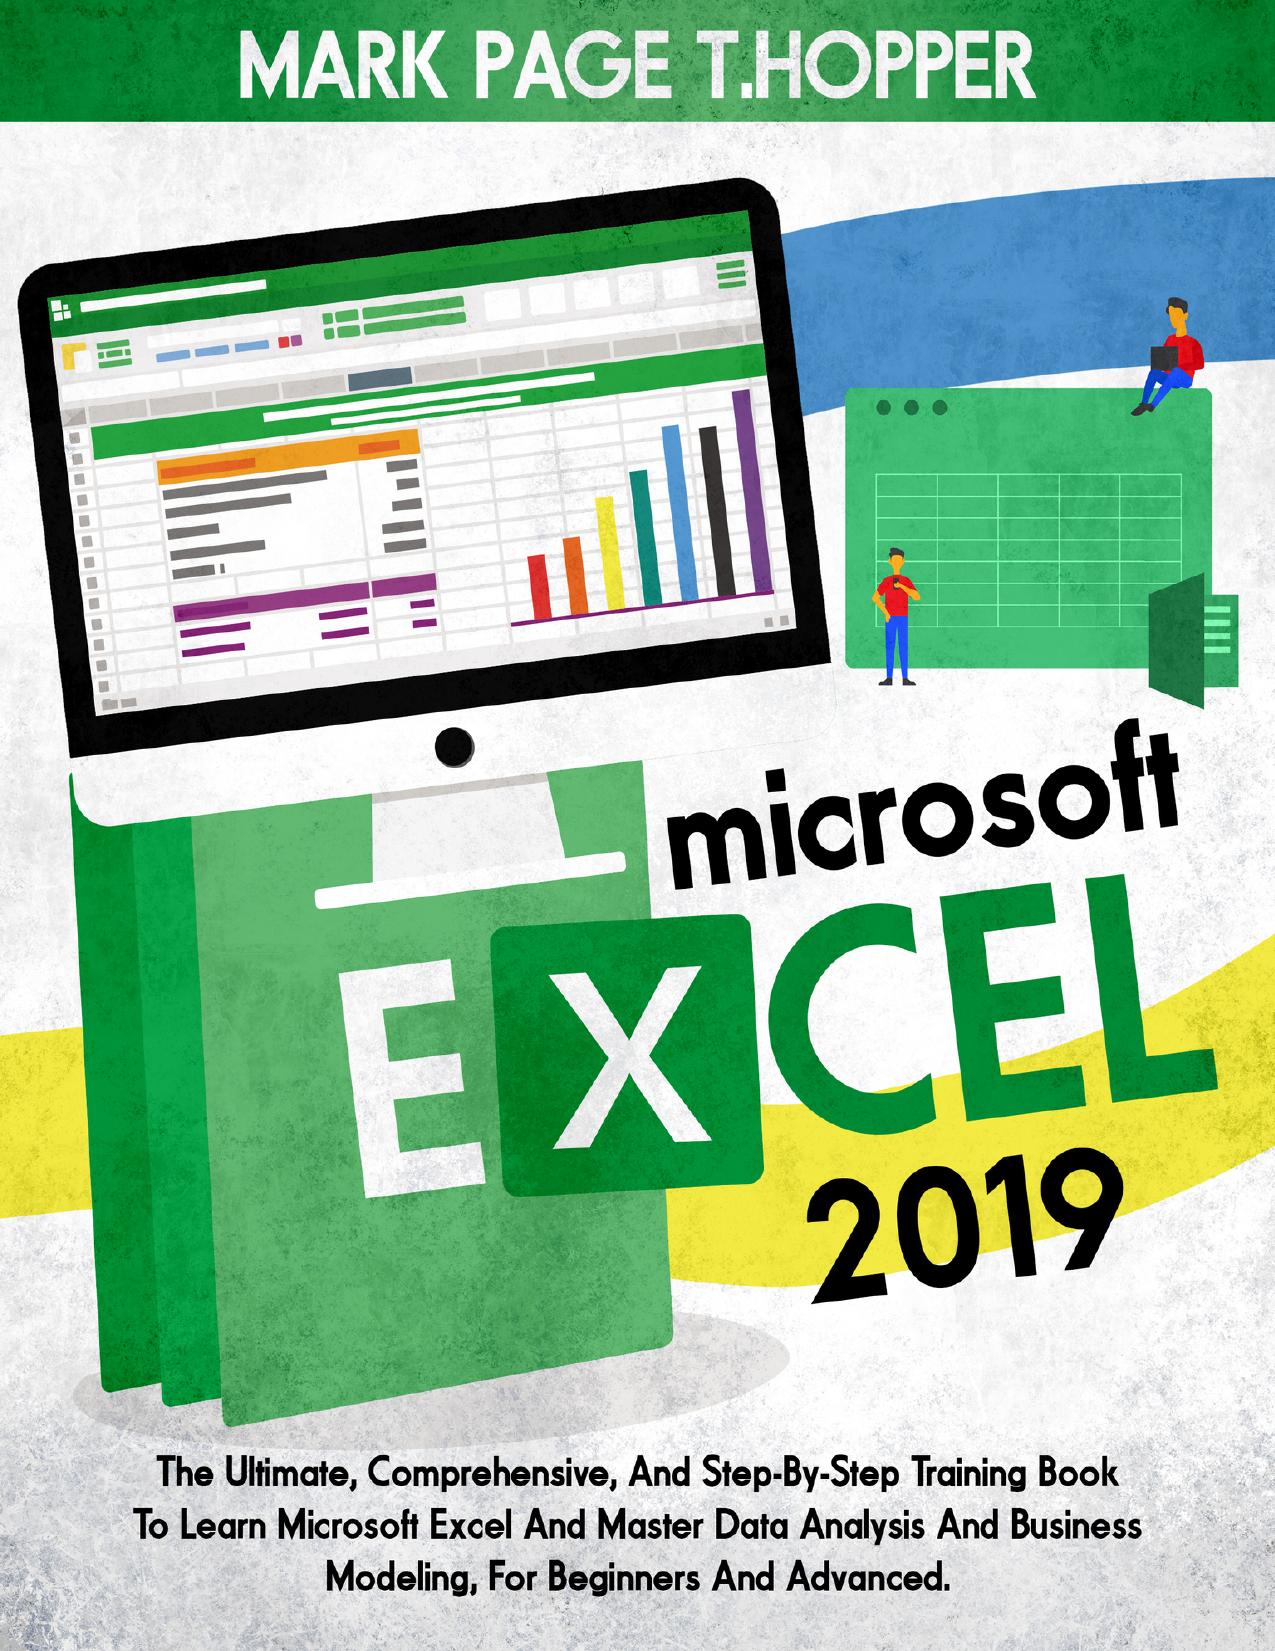 Microsoft Excel 2019 : The Ultimate, Comprehensive, And Step-By-Step Training Book To Learn Microsoft Excel And Master Data Analysis And Business Modeling, For Beginners And Advanced